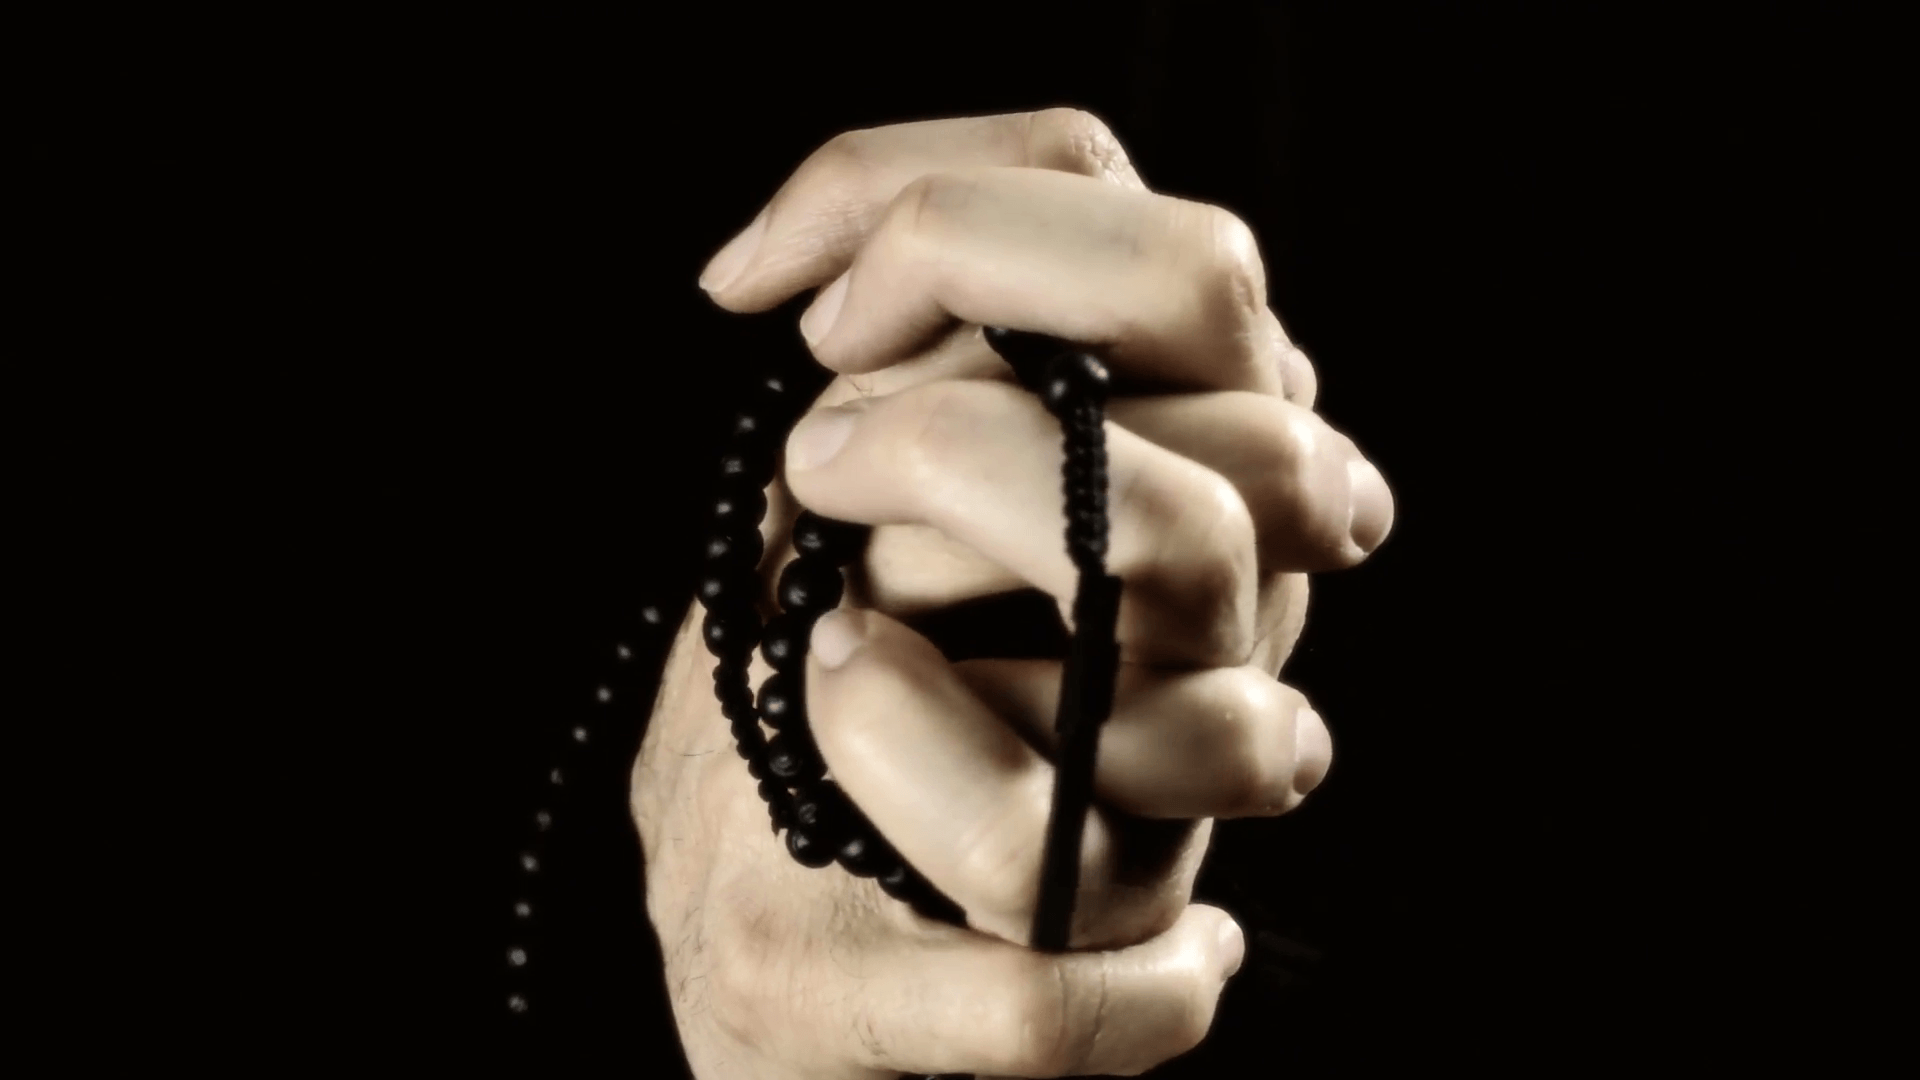 Hands praying black rosary. The wrinkled hands of an old man holding